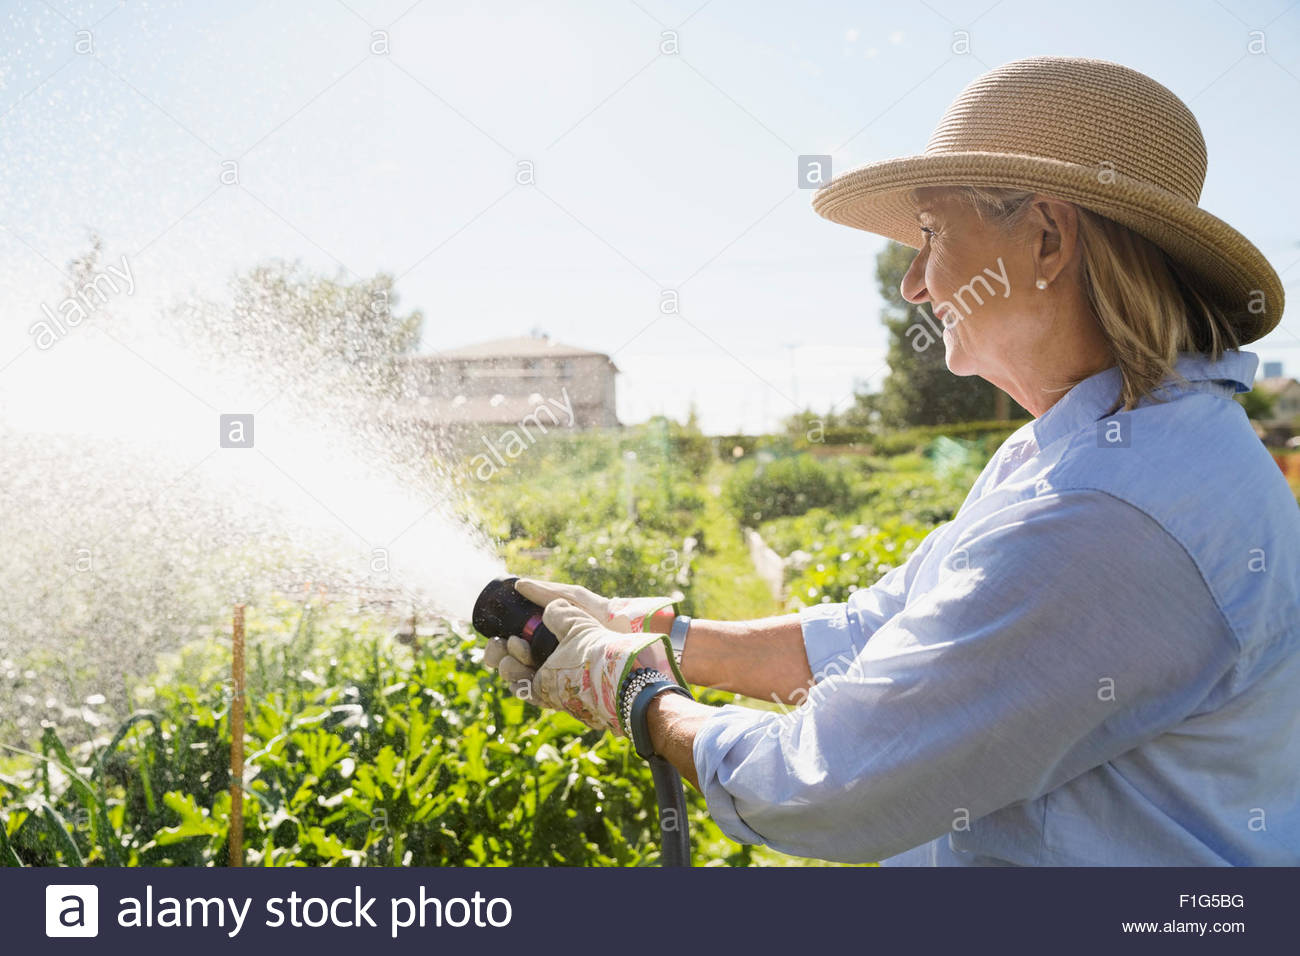 Senior woman watering vegetable garden with hose Stock Photo